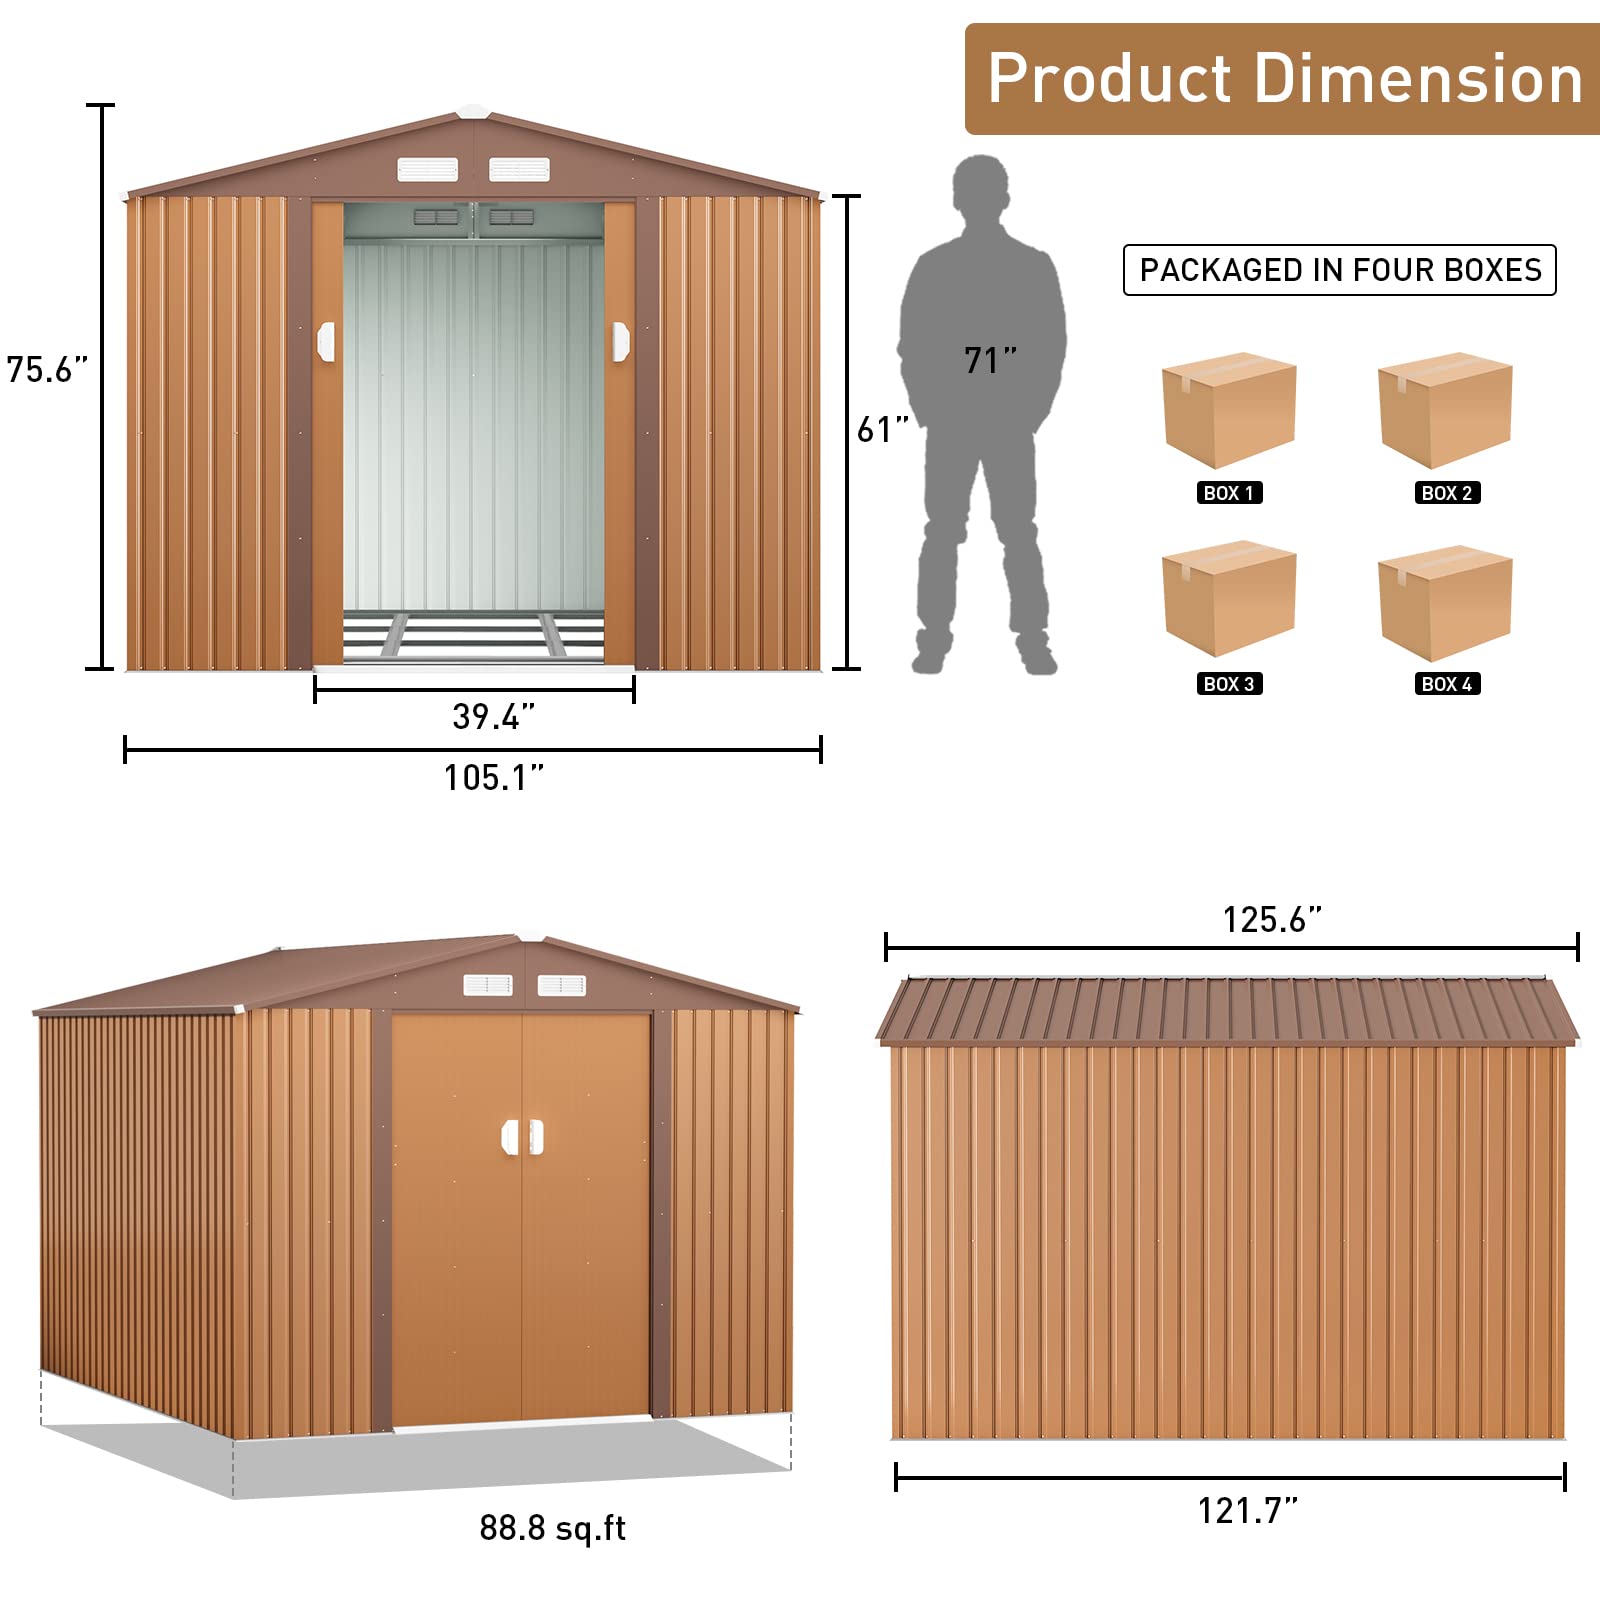 HOGYME 10.5' x 9.1' Storage Shed Large Metal Shed, Sheds &Outdoor Storage Clearance Suitable for Garden Tool Bike Lawn Mower Ladder, Utility Tool House w/Lockable/Sliding Door, 4 Vents, Coffee